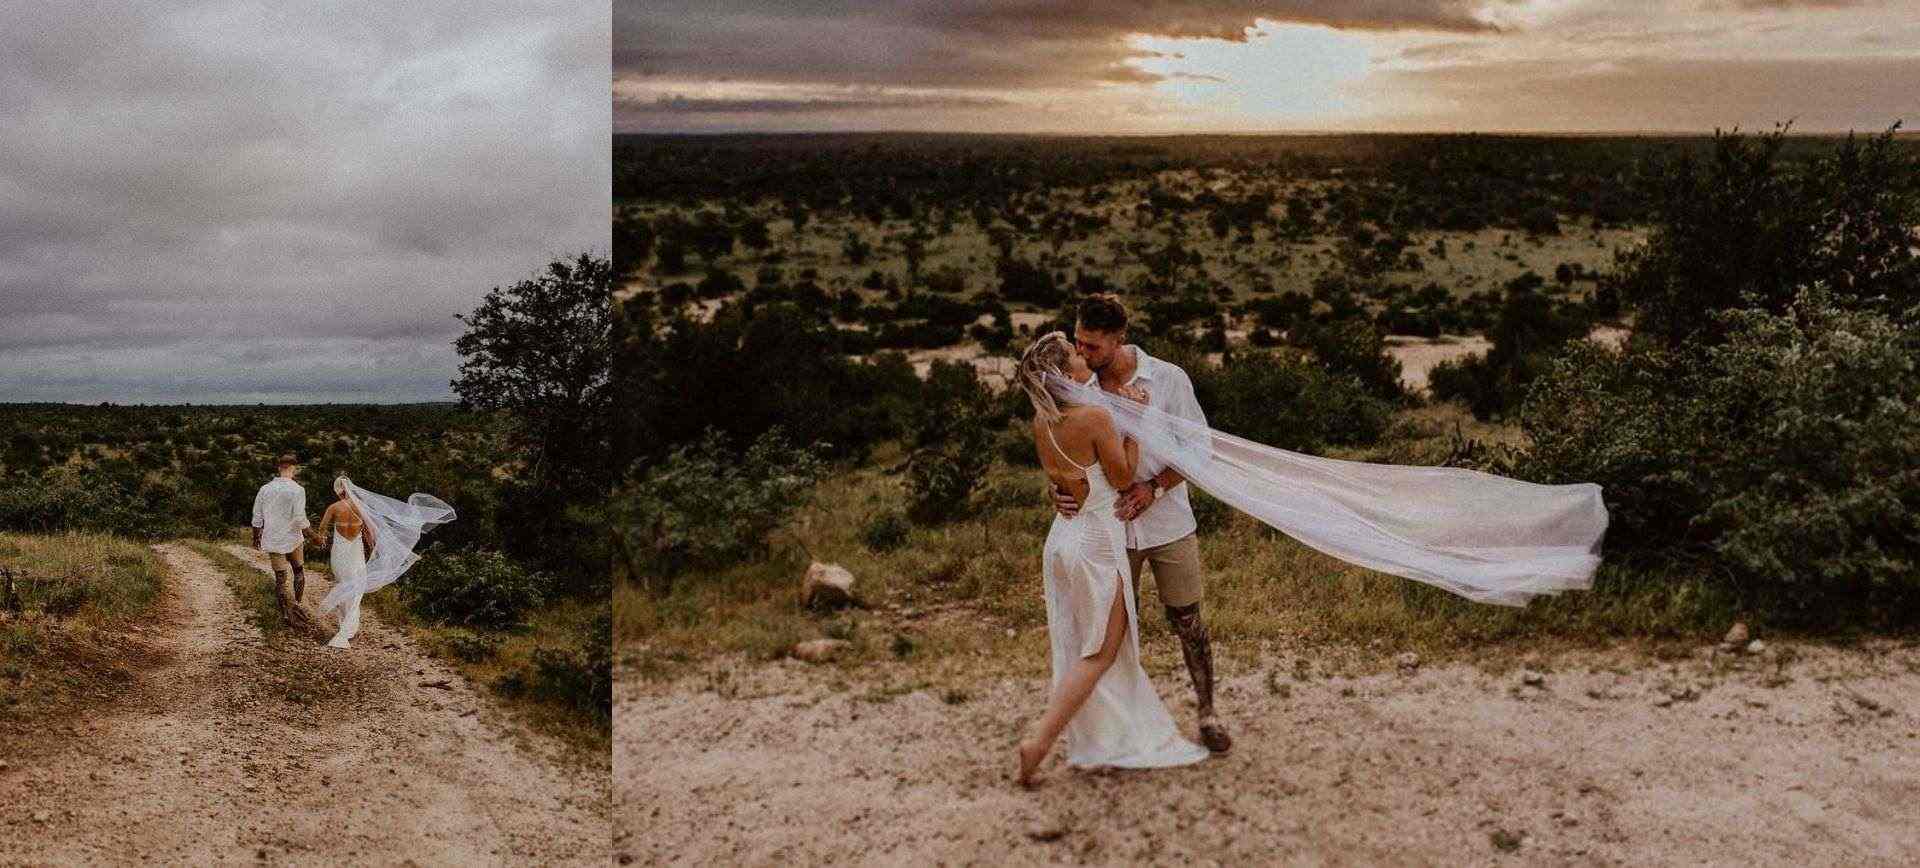 all inclusive elopement wedding and safari honeymoon in south africa